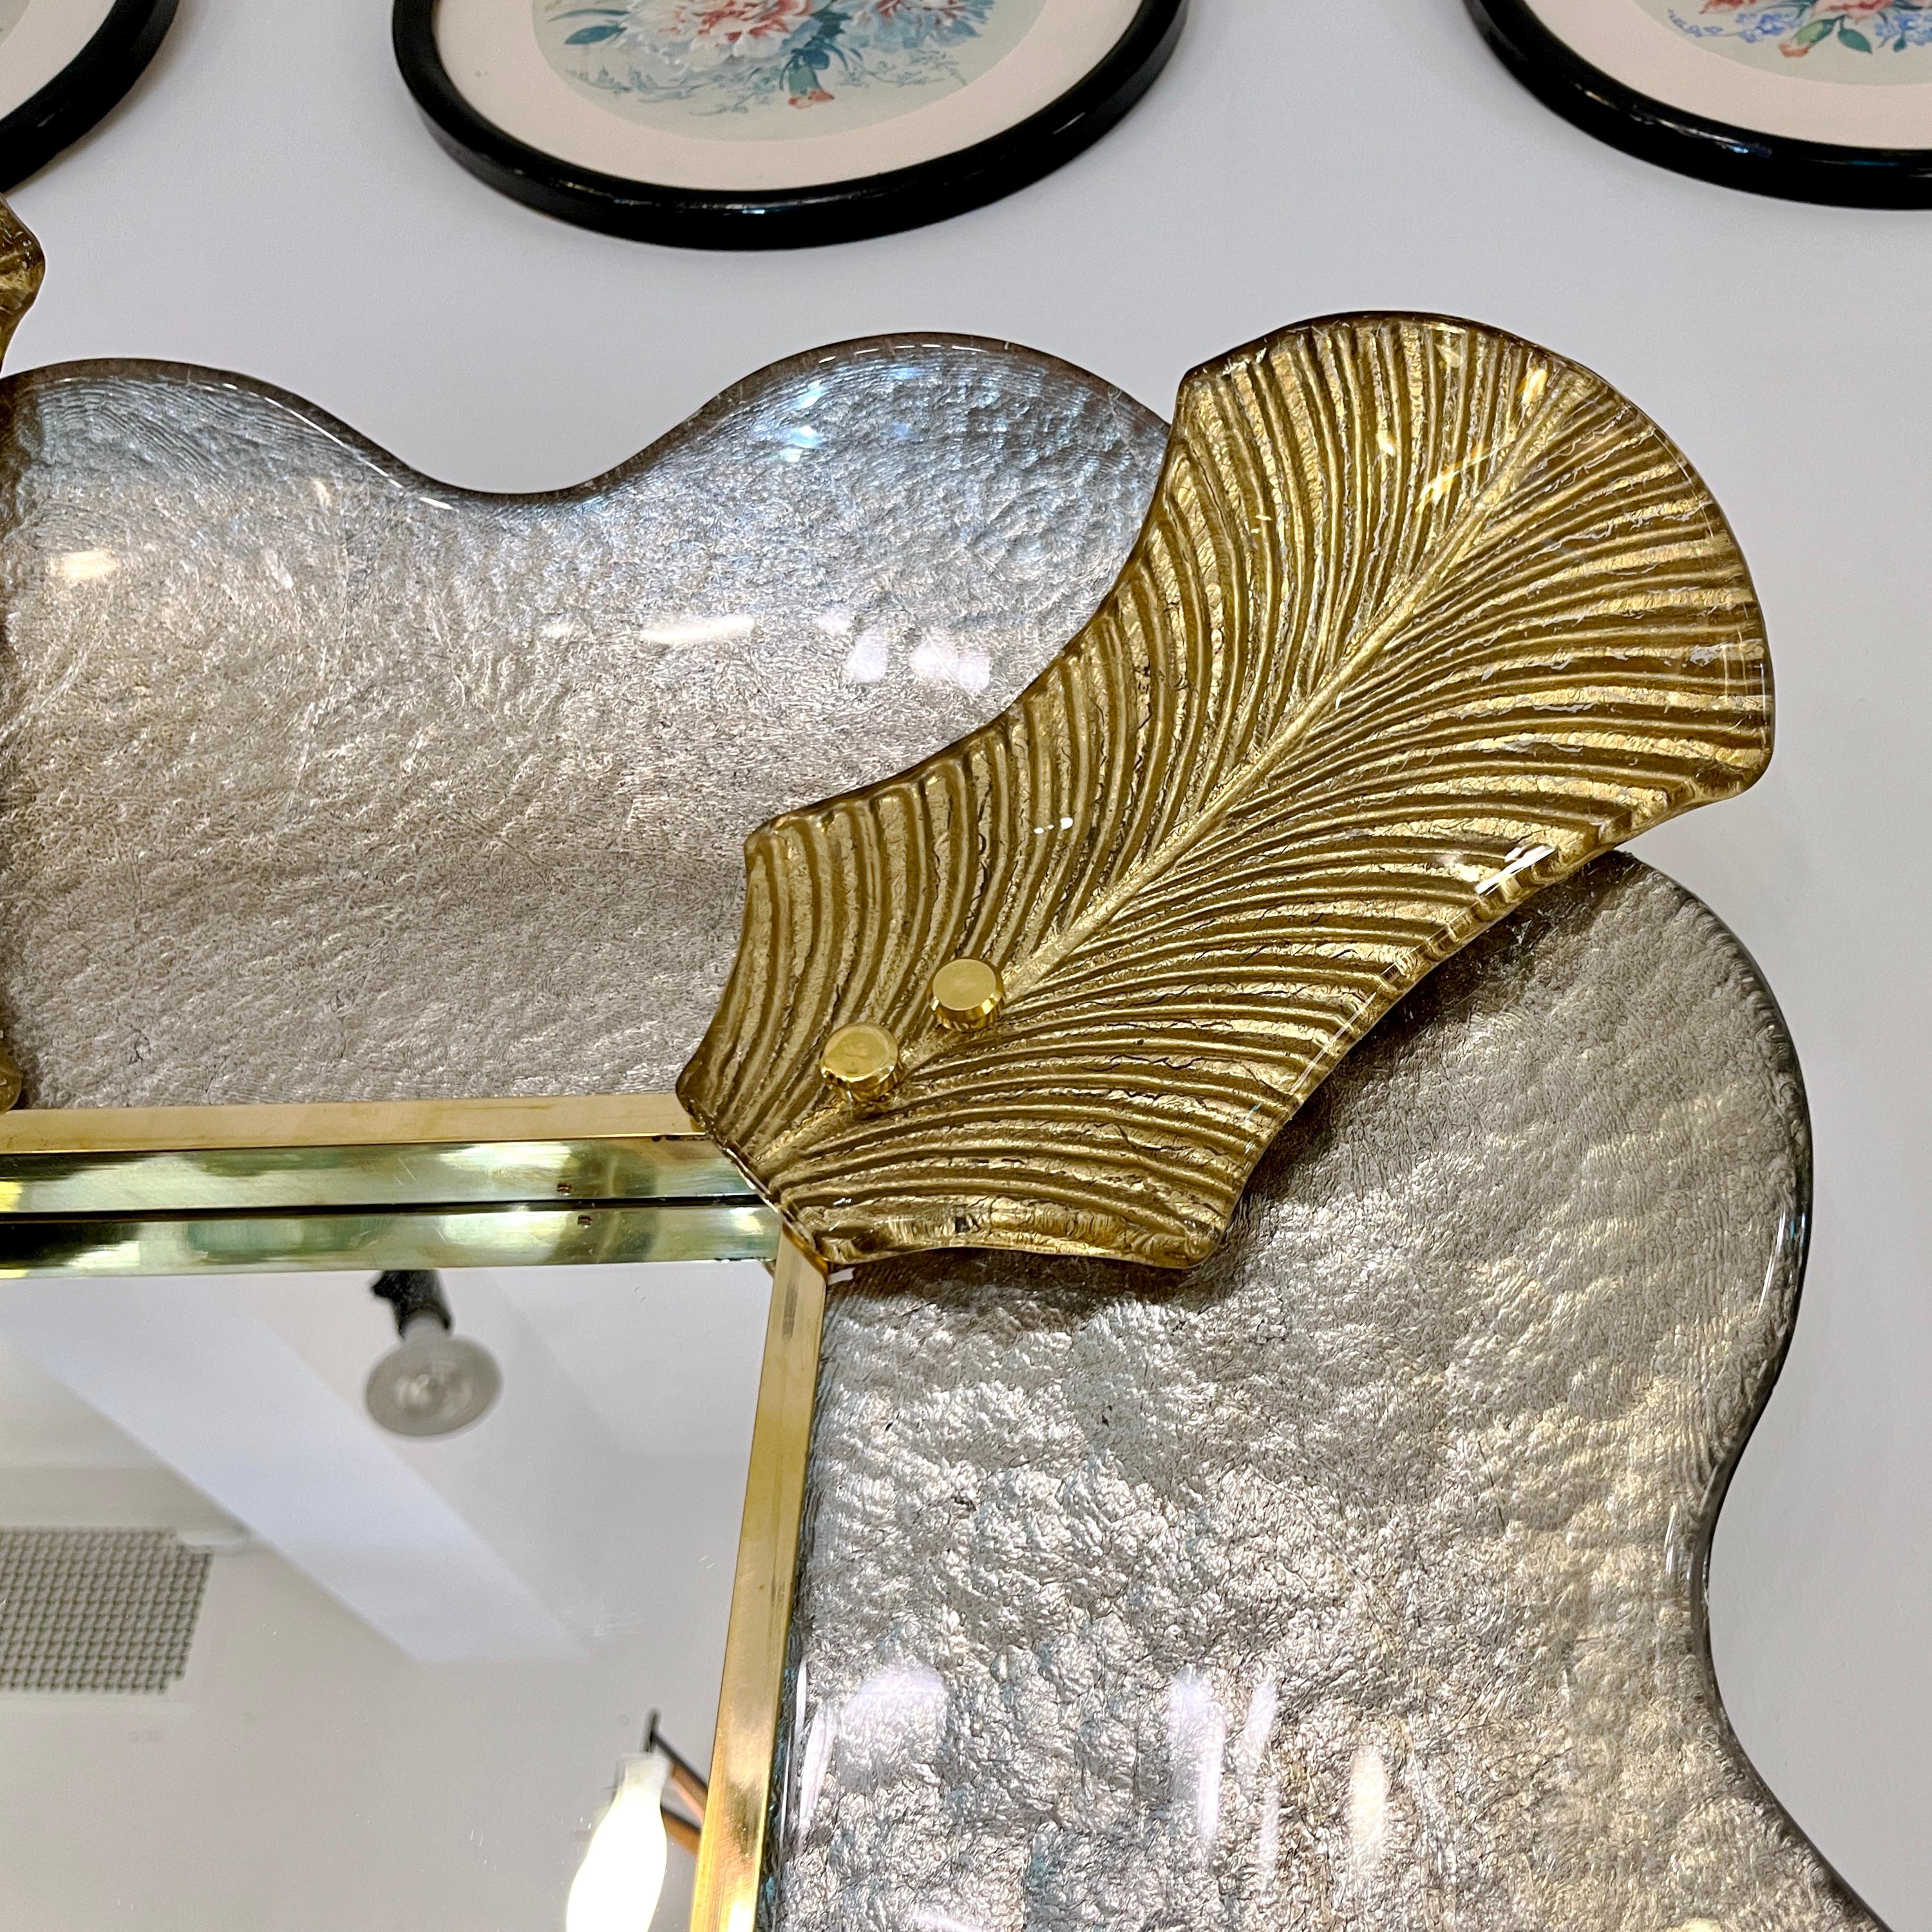 Bespoke Italian Art Deco Style Curved Leaf Gold Silver Murano Glass Brass Mirror For Sale 5